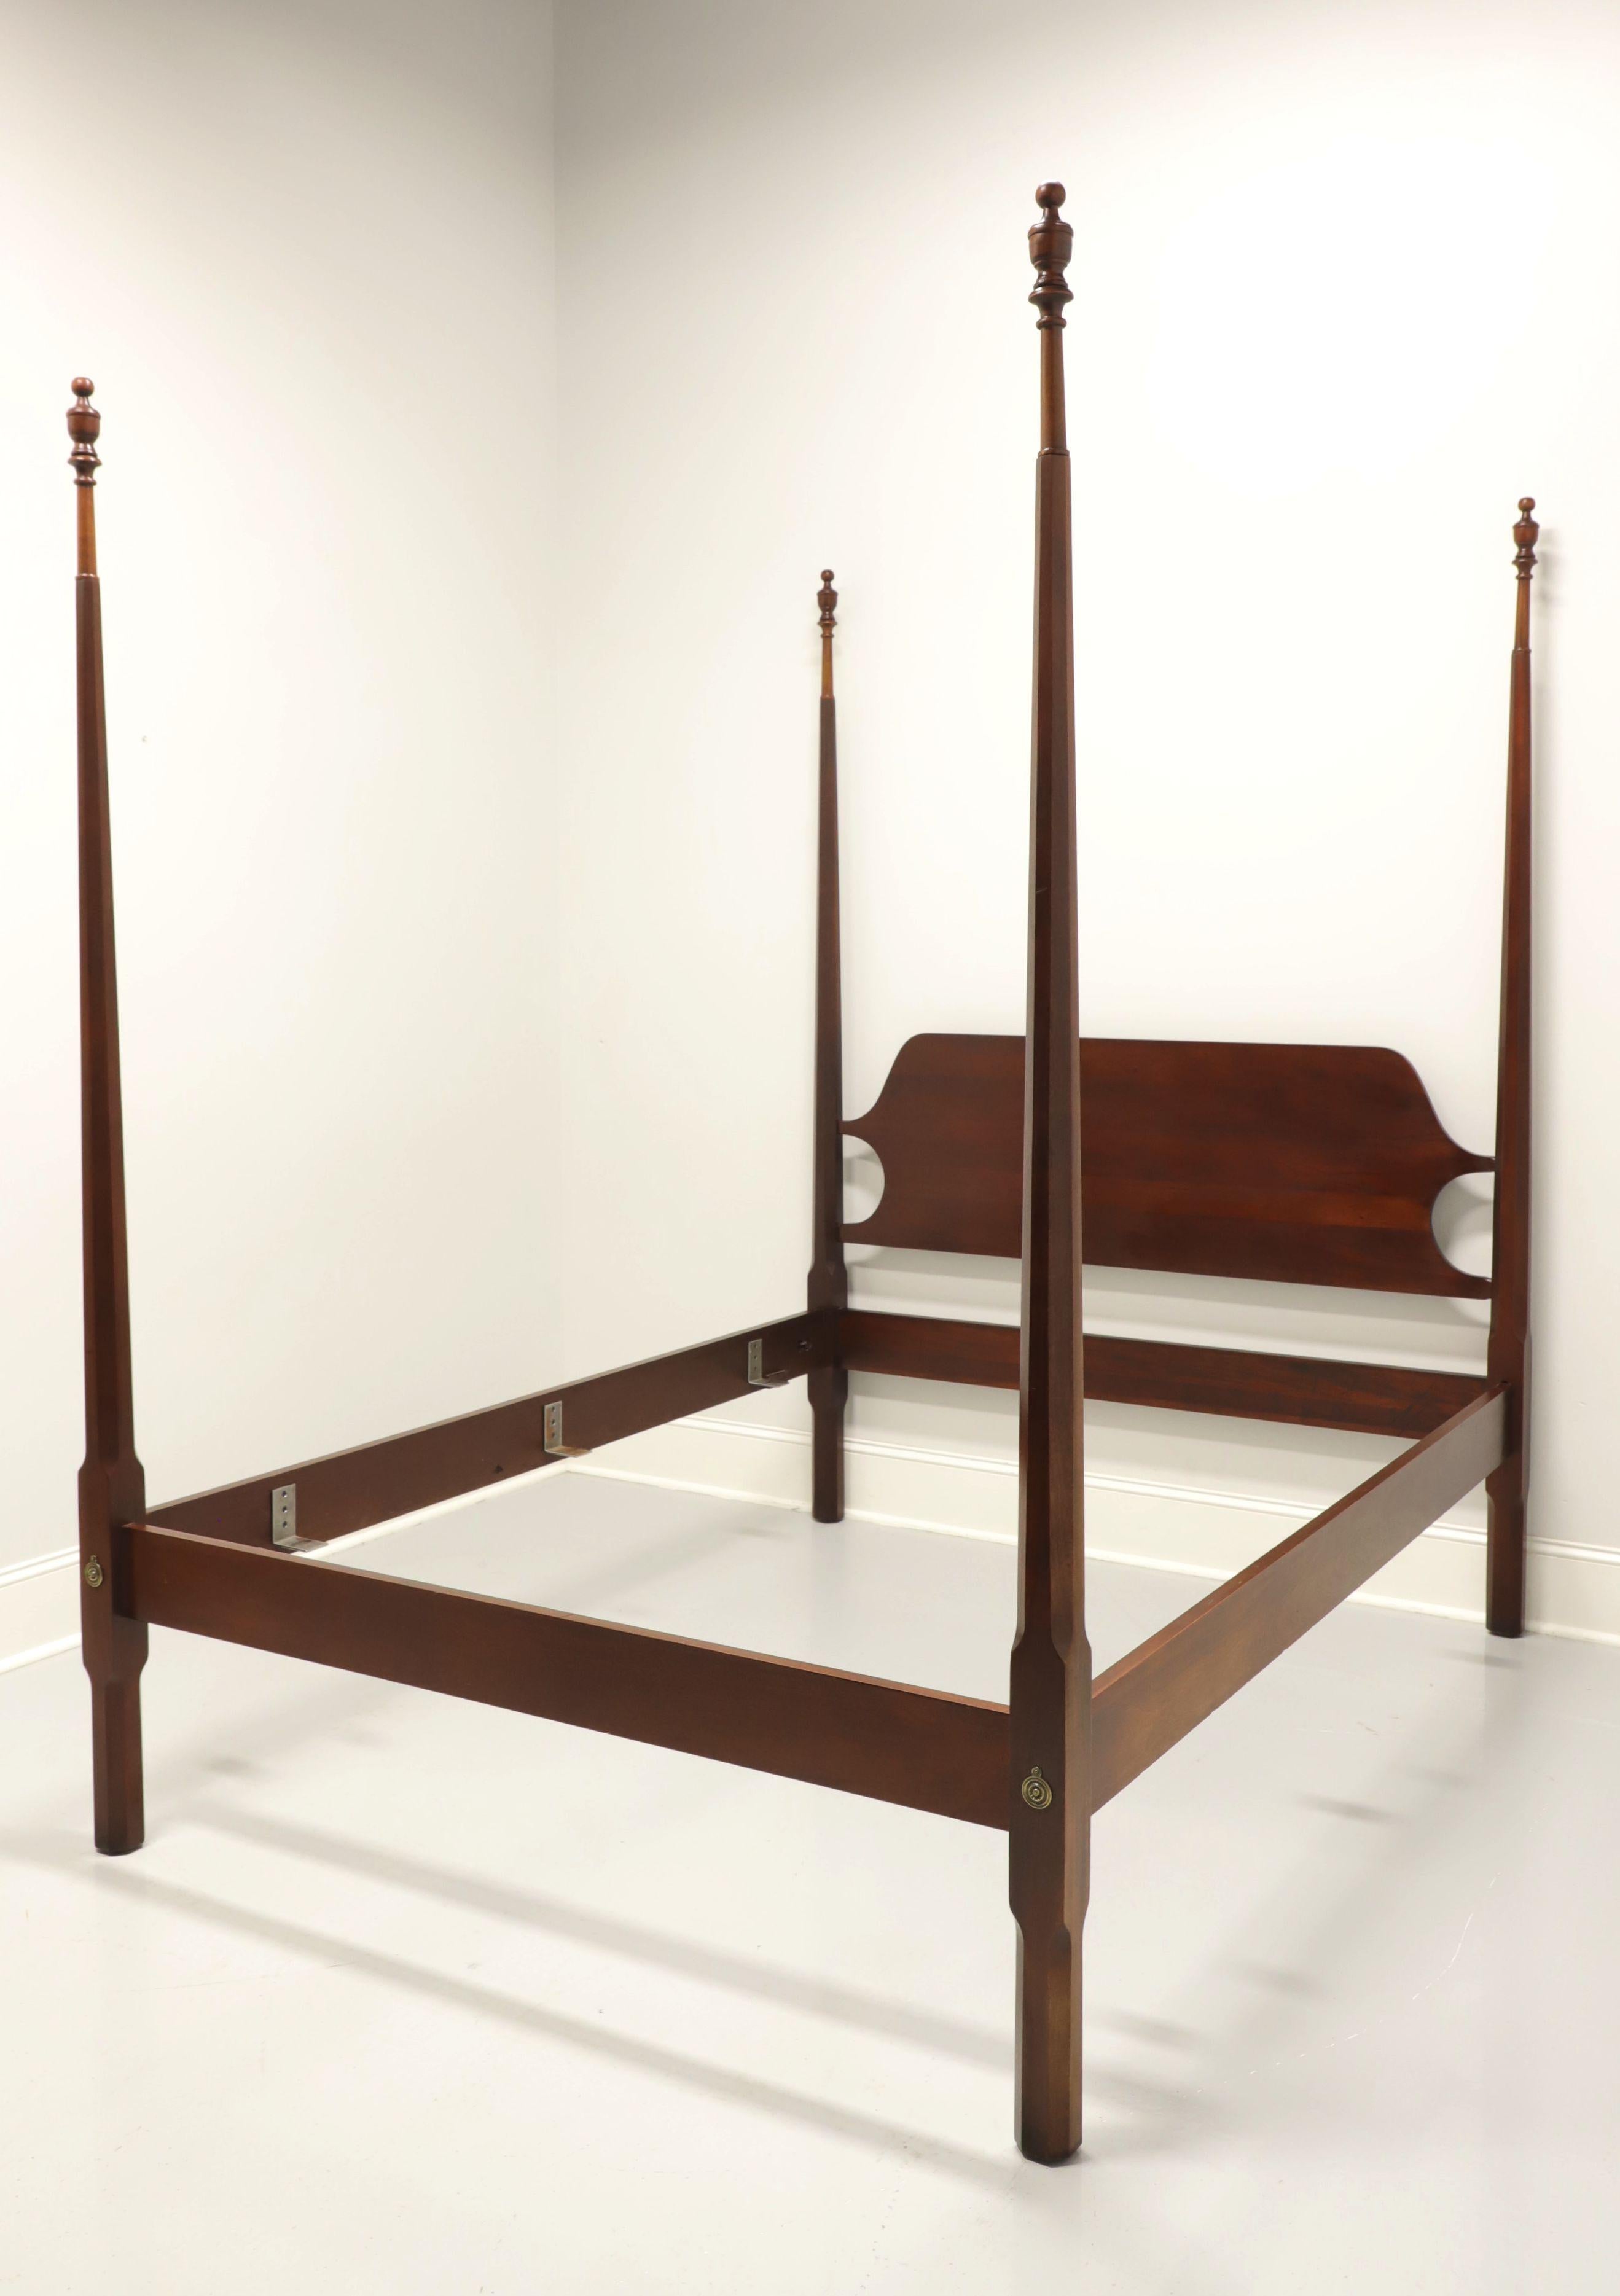 A Traditional style queen size pencil post bed with canopy by Craftique. Solid mahogany with four pencil like posts capped by finials, an open wood slat canopy, bolt held side rails with metal mattress supports, brass hardware, and finial extenders